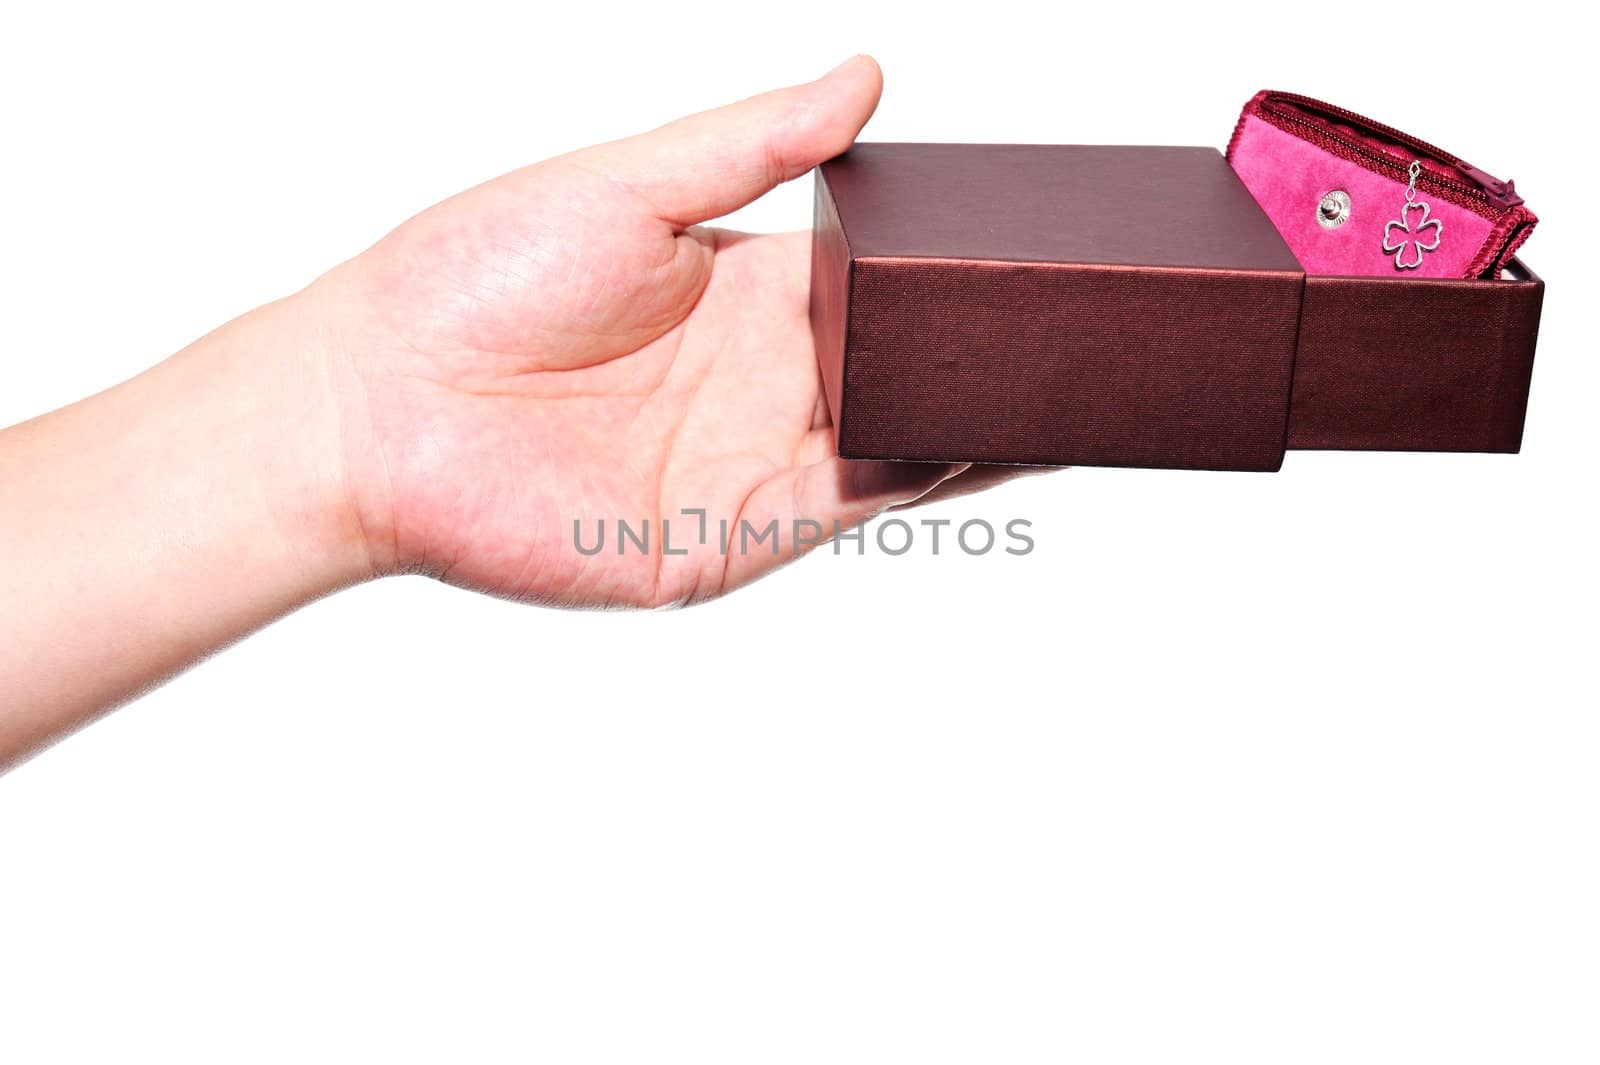 Holding a gift box with a necklace in it